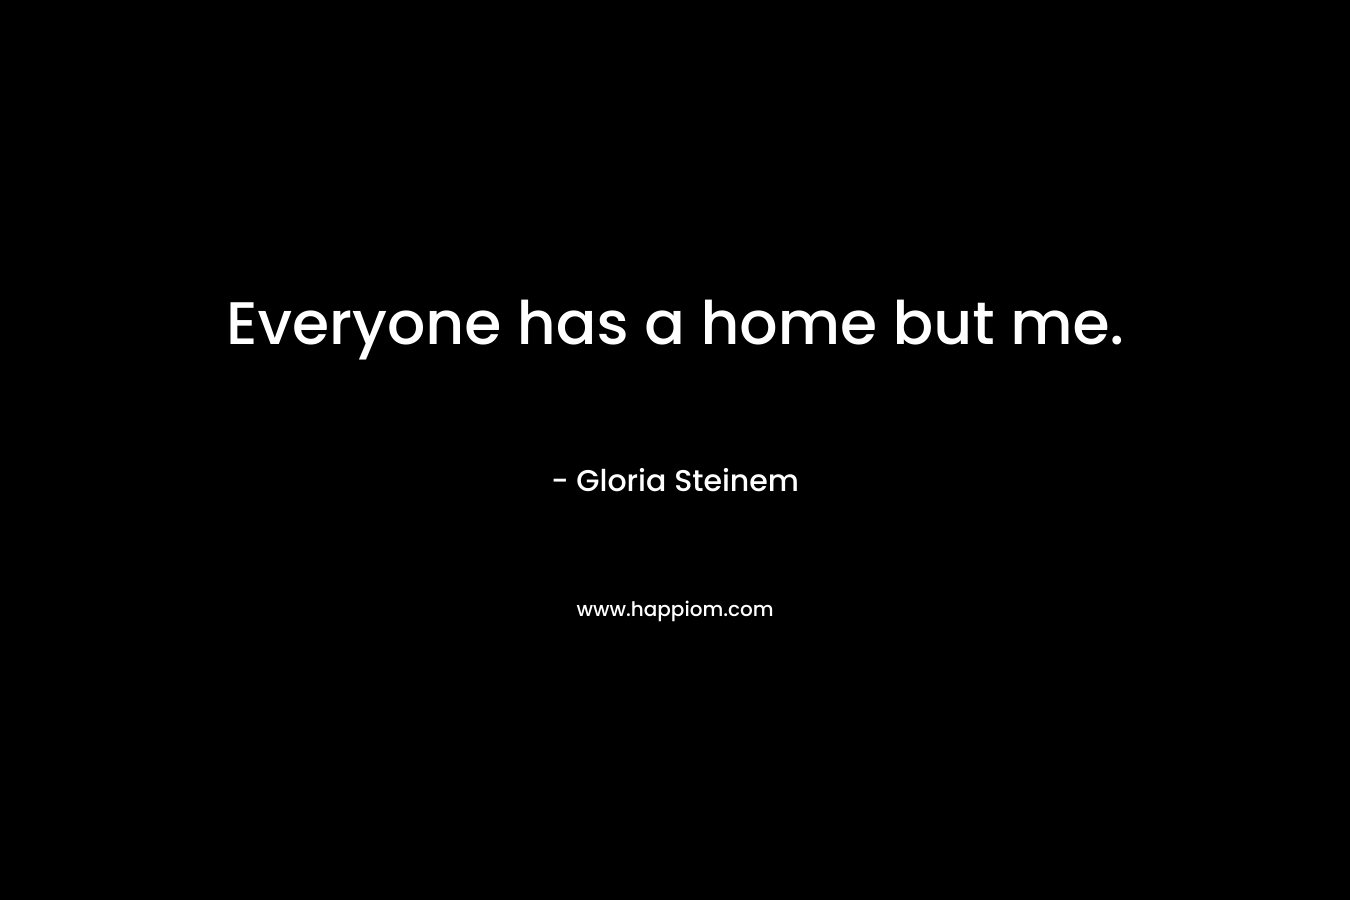 Everyone has a home but me.